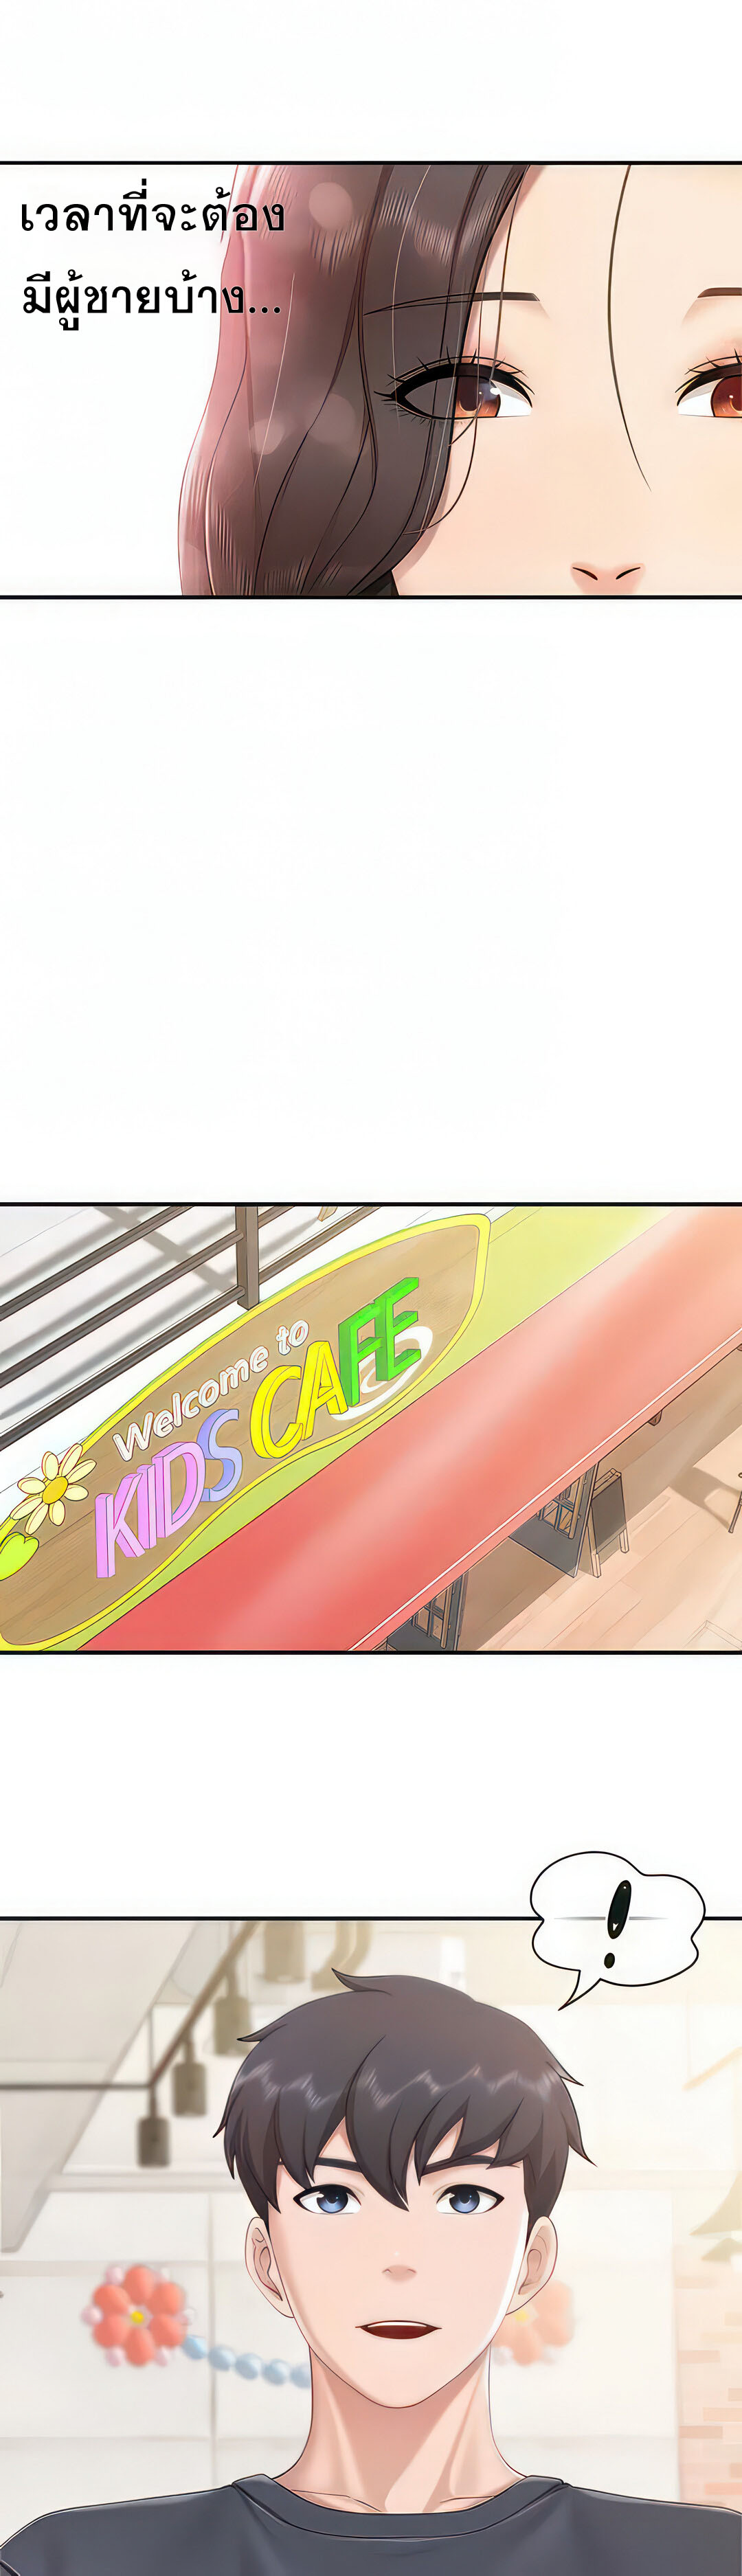 Welcome To Kids Cafe 58 15